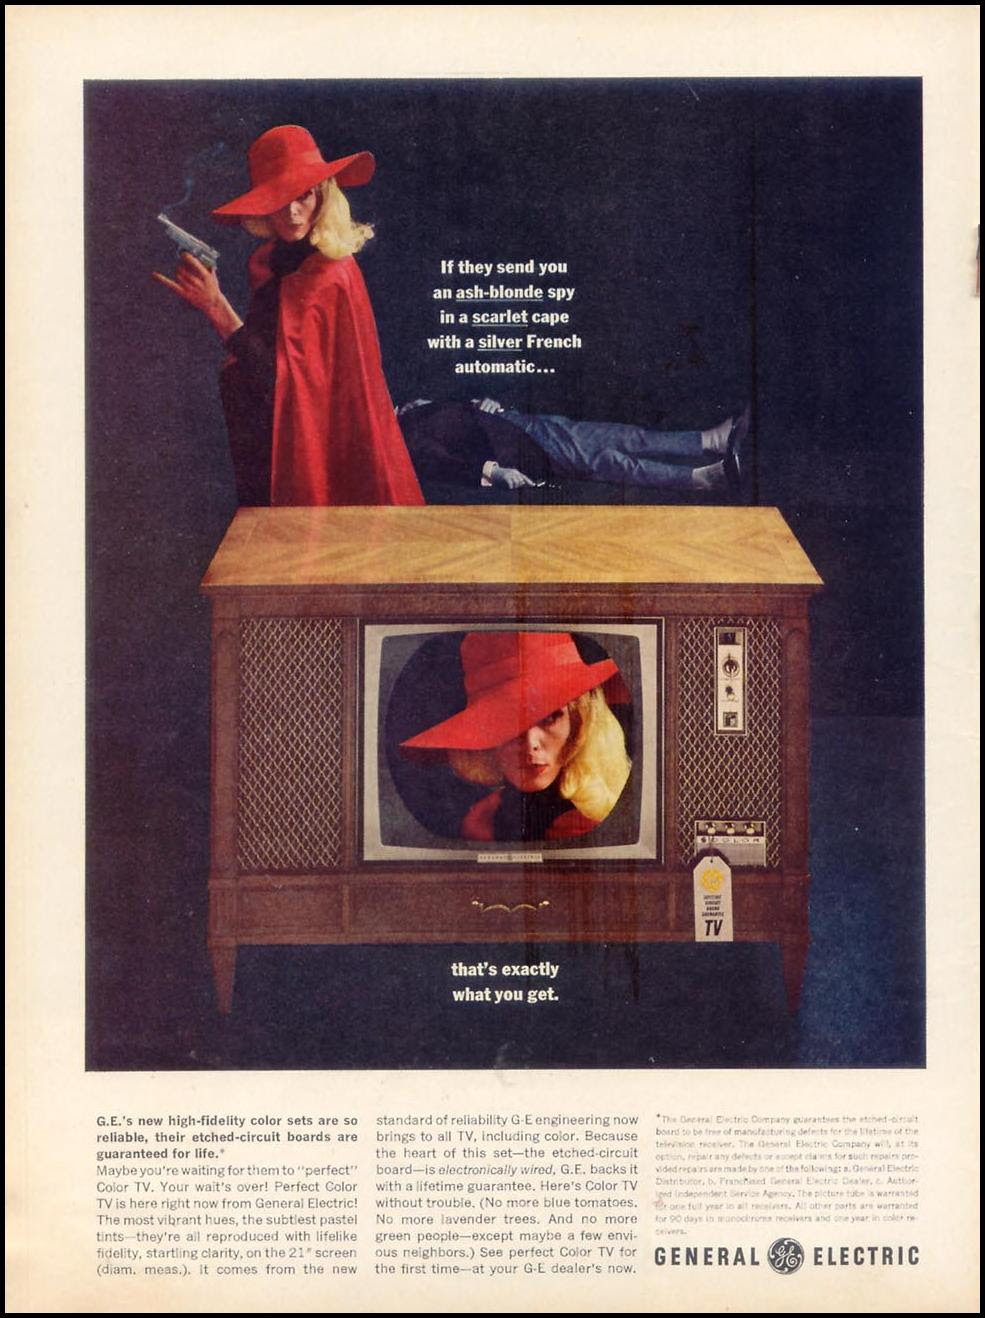 GENERAL ELECTRIC PERFECT COLOR TELEVISION
TIME
12/06/1963
p. 8